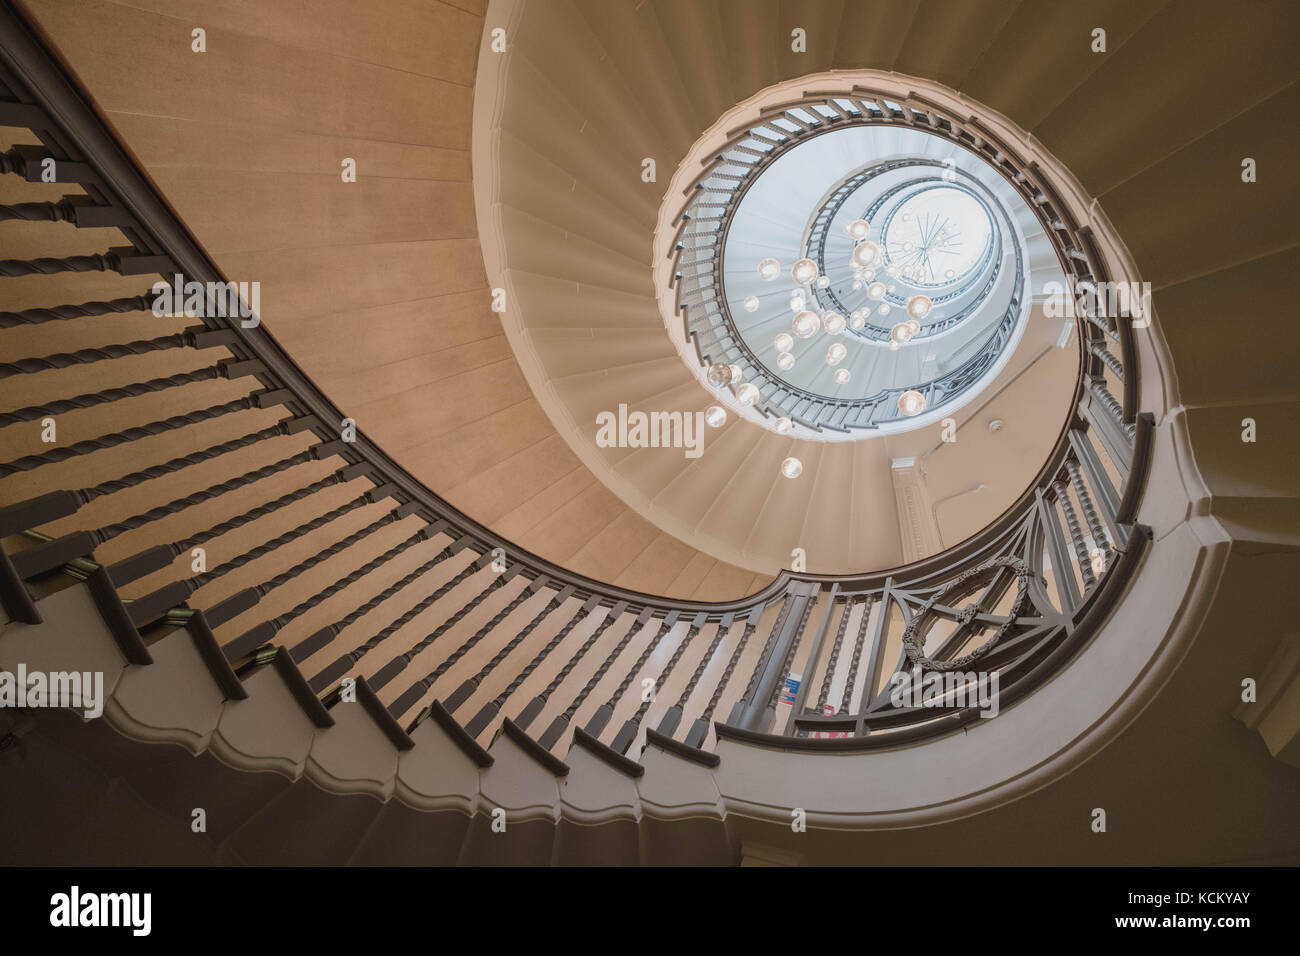 Colour image of Cecil Brewer's spiral staircase in Heals Department Store, Tottenham Court Road, London UK Stock Photo